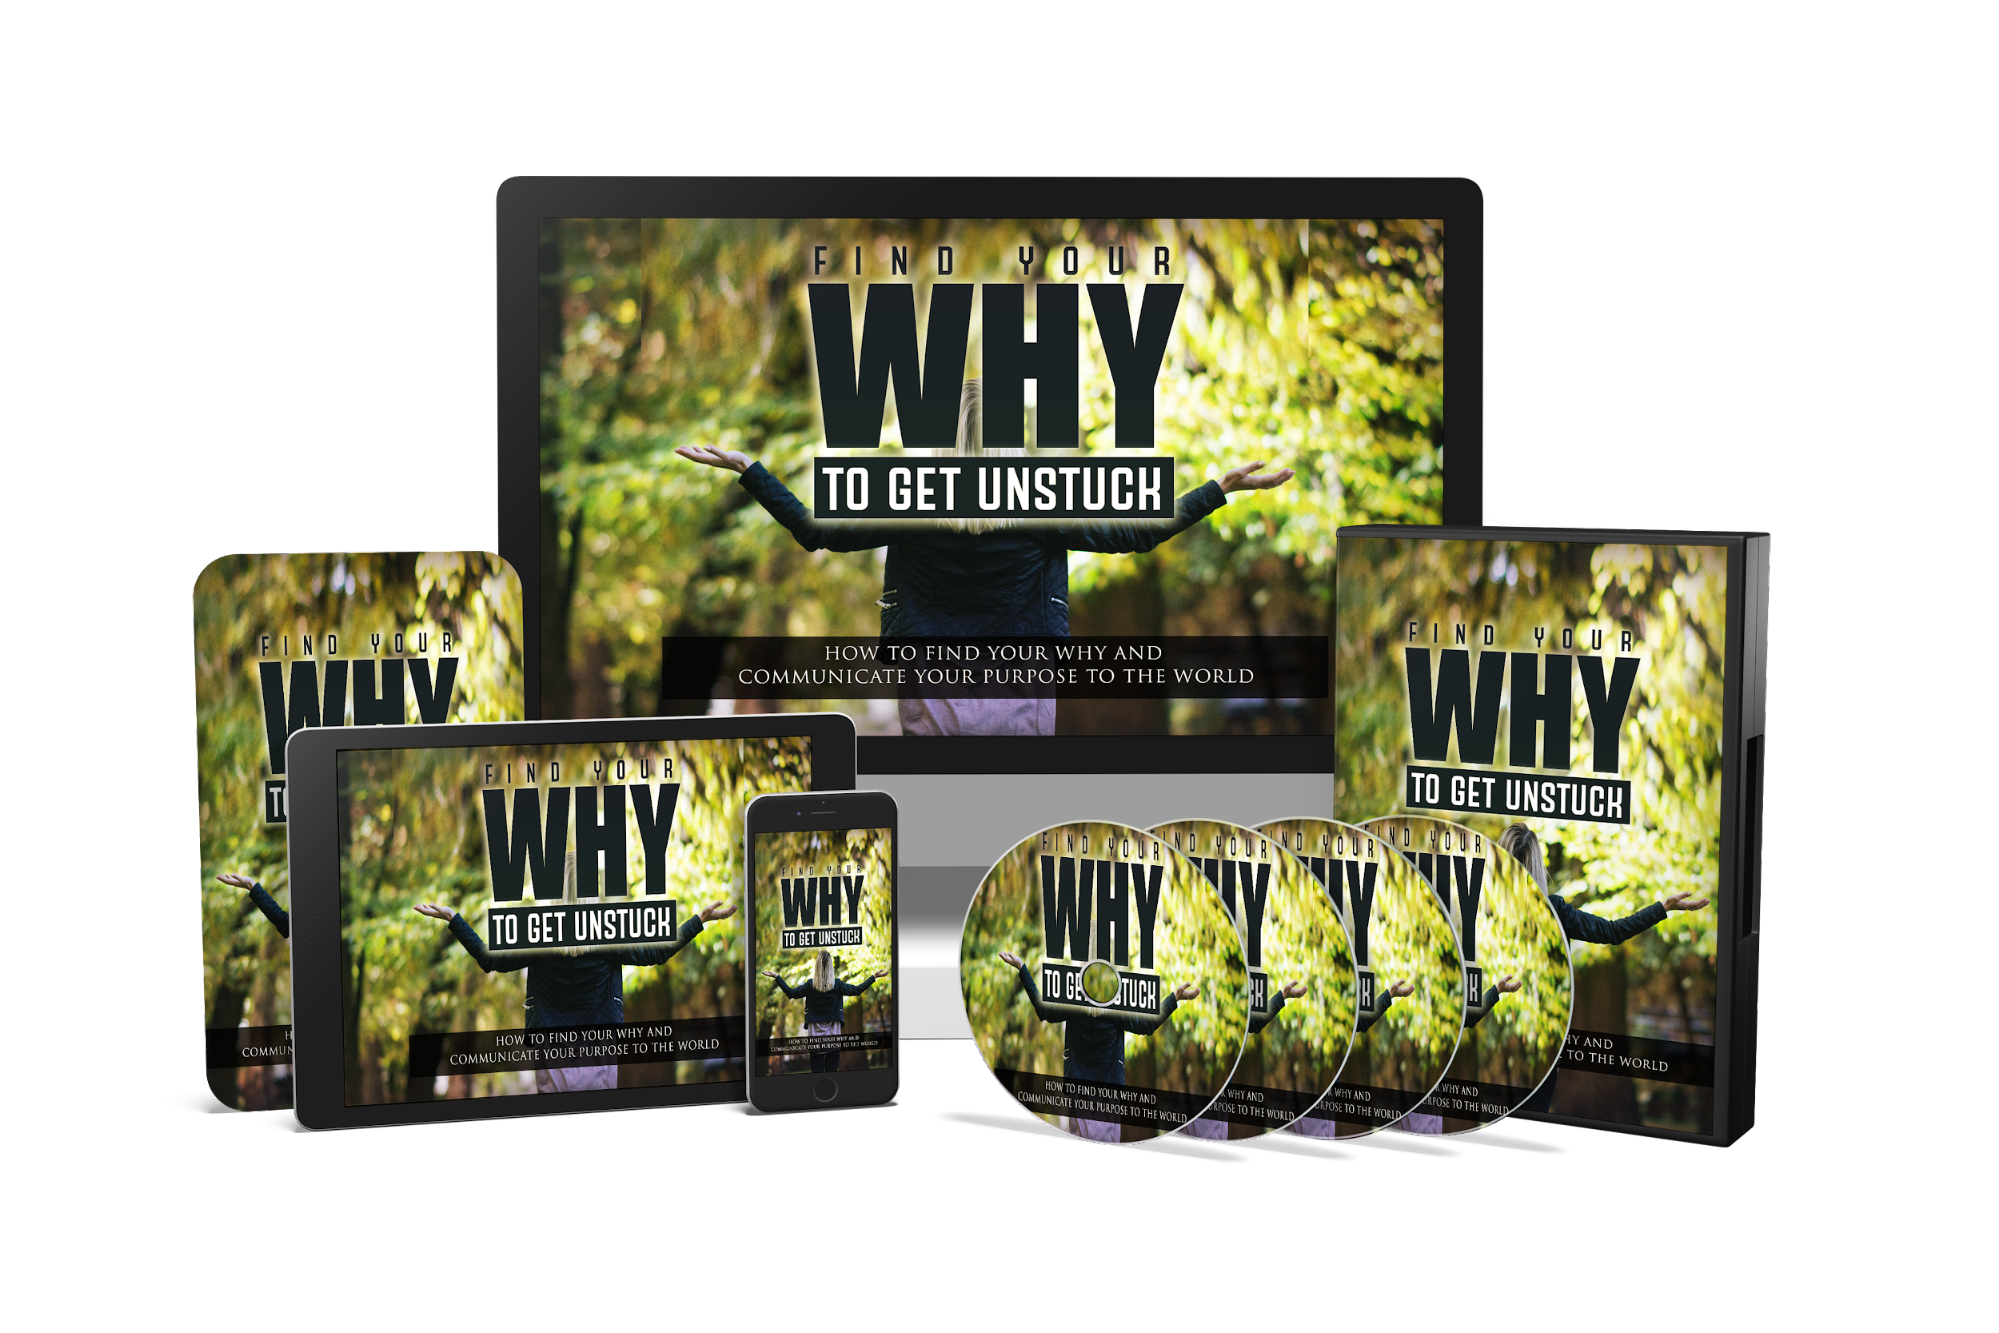 Find Your Why To Get Unstuck